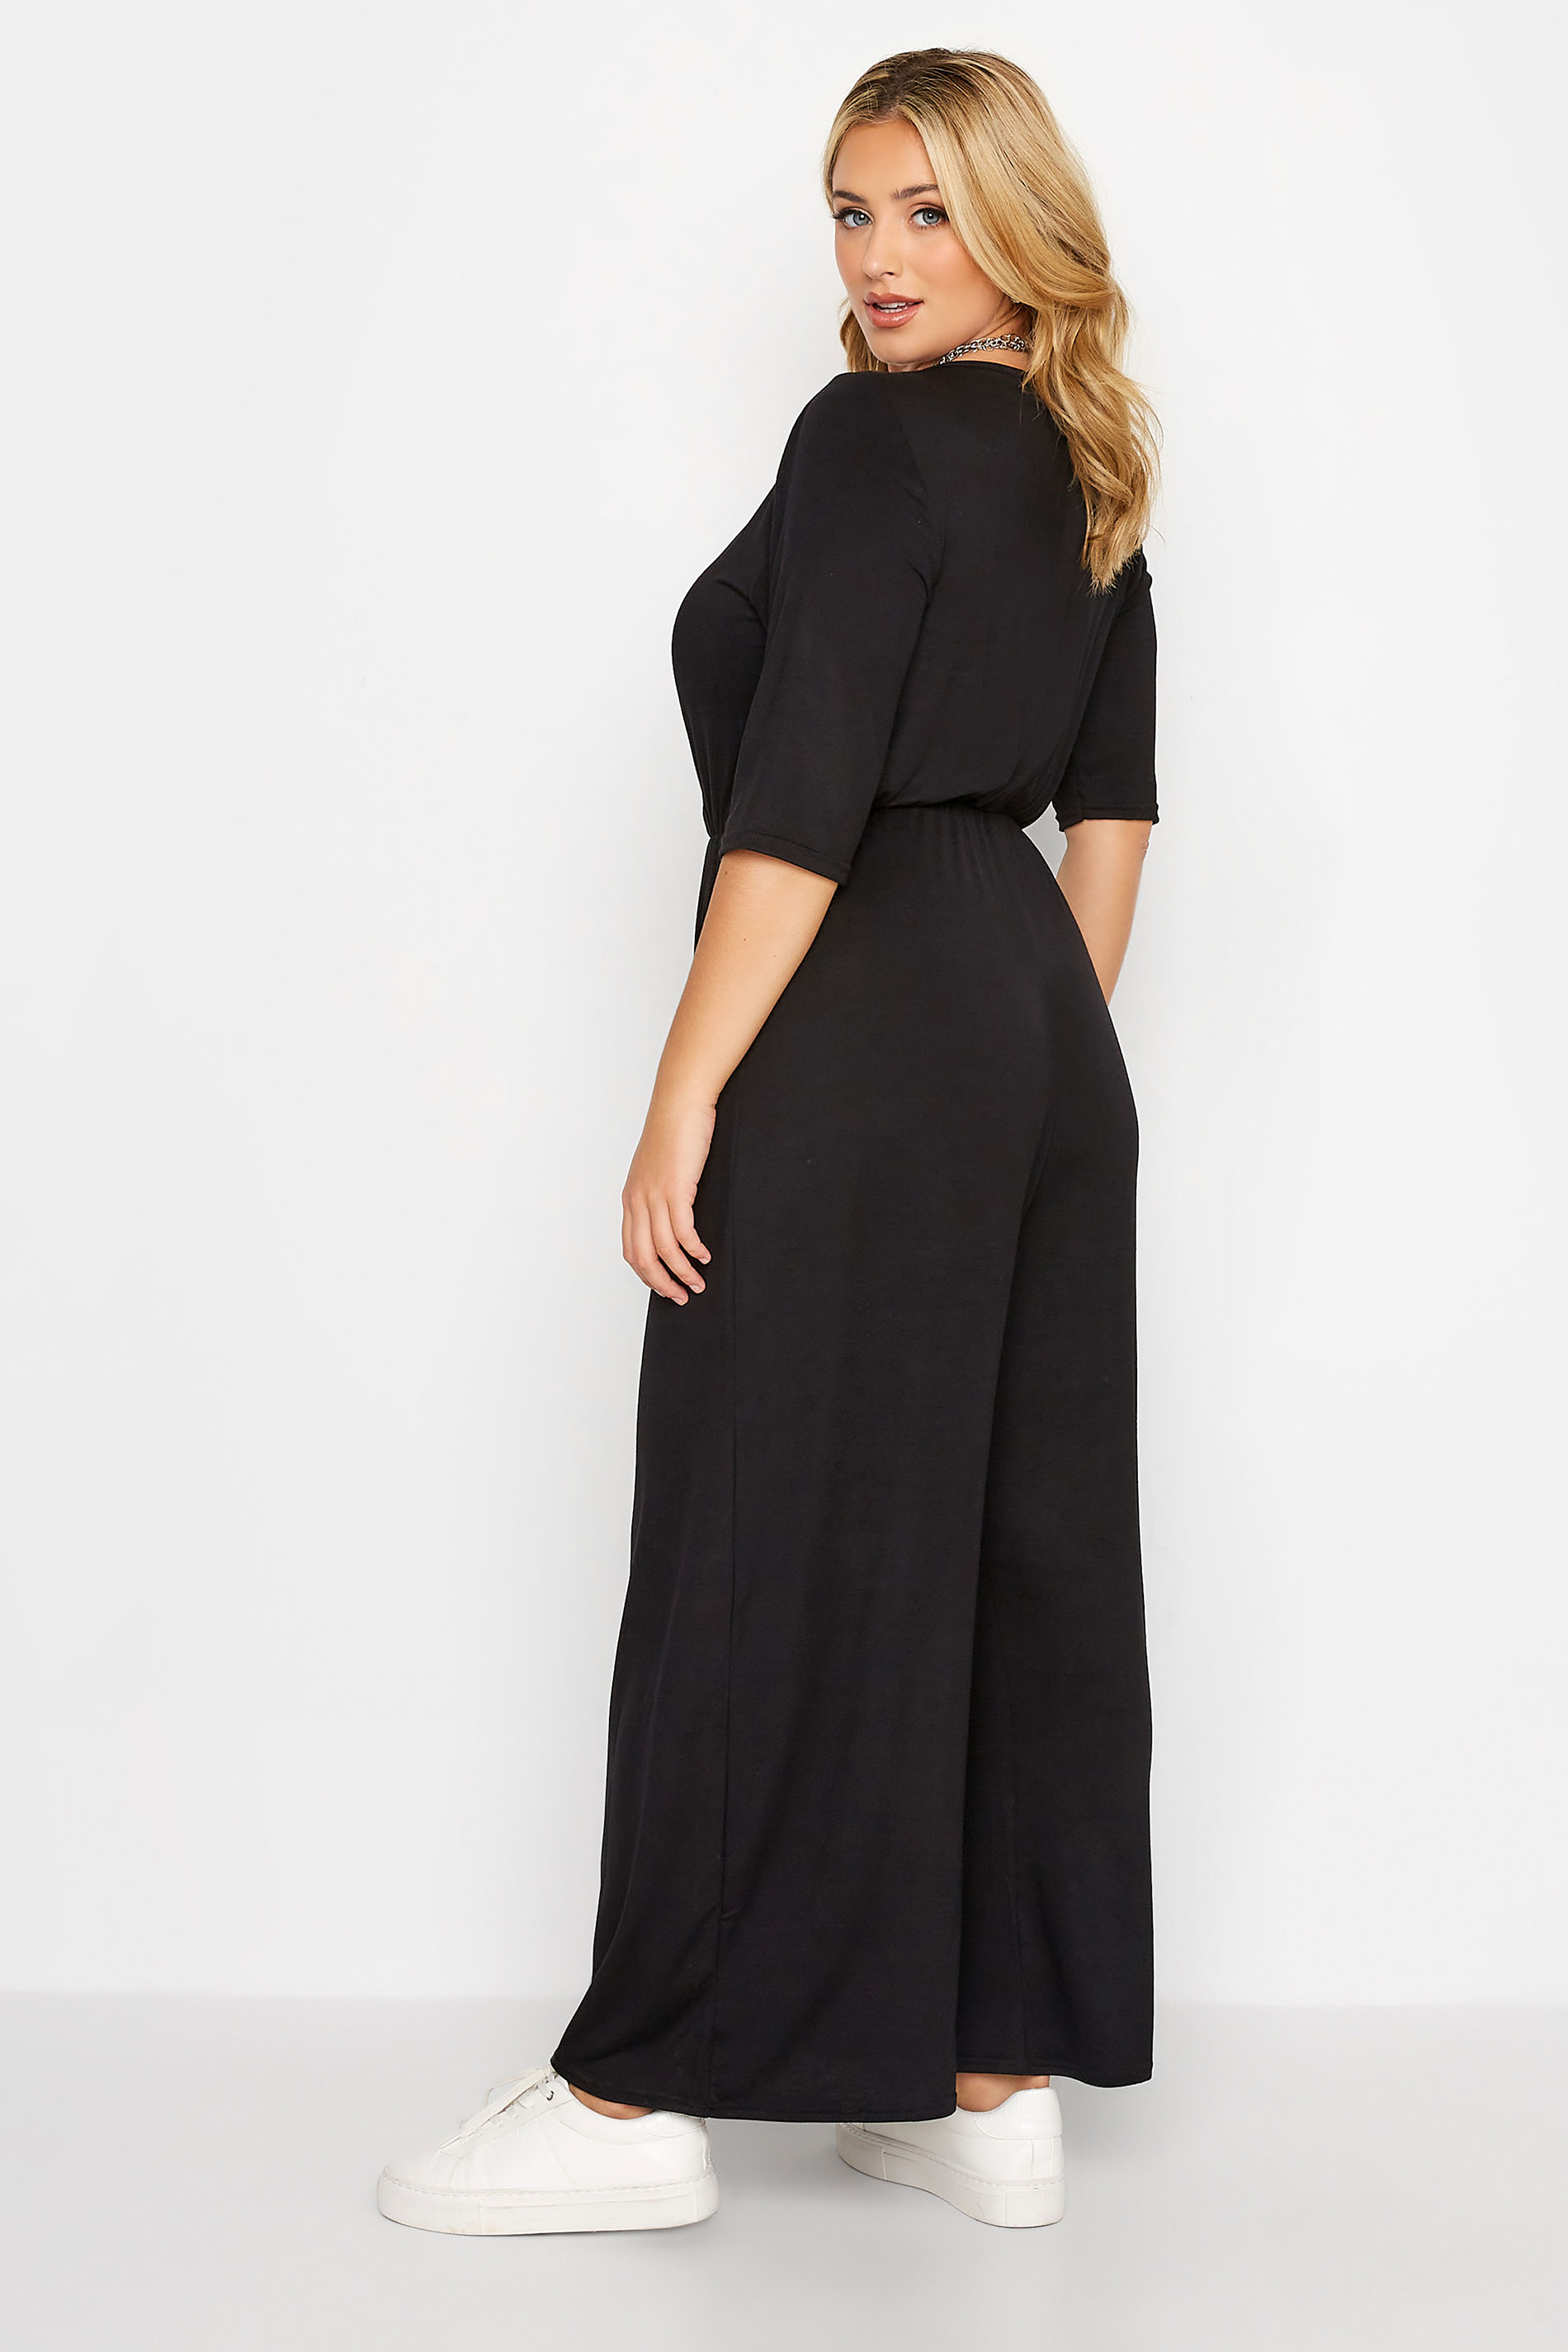 LIMITED COLLECTION Plus Size Black Culotte Jumpsuit | Yours Clothing 3